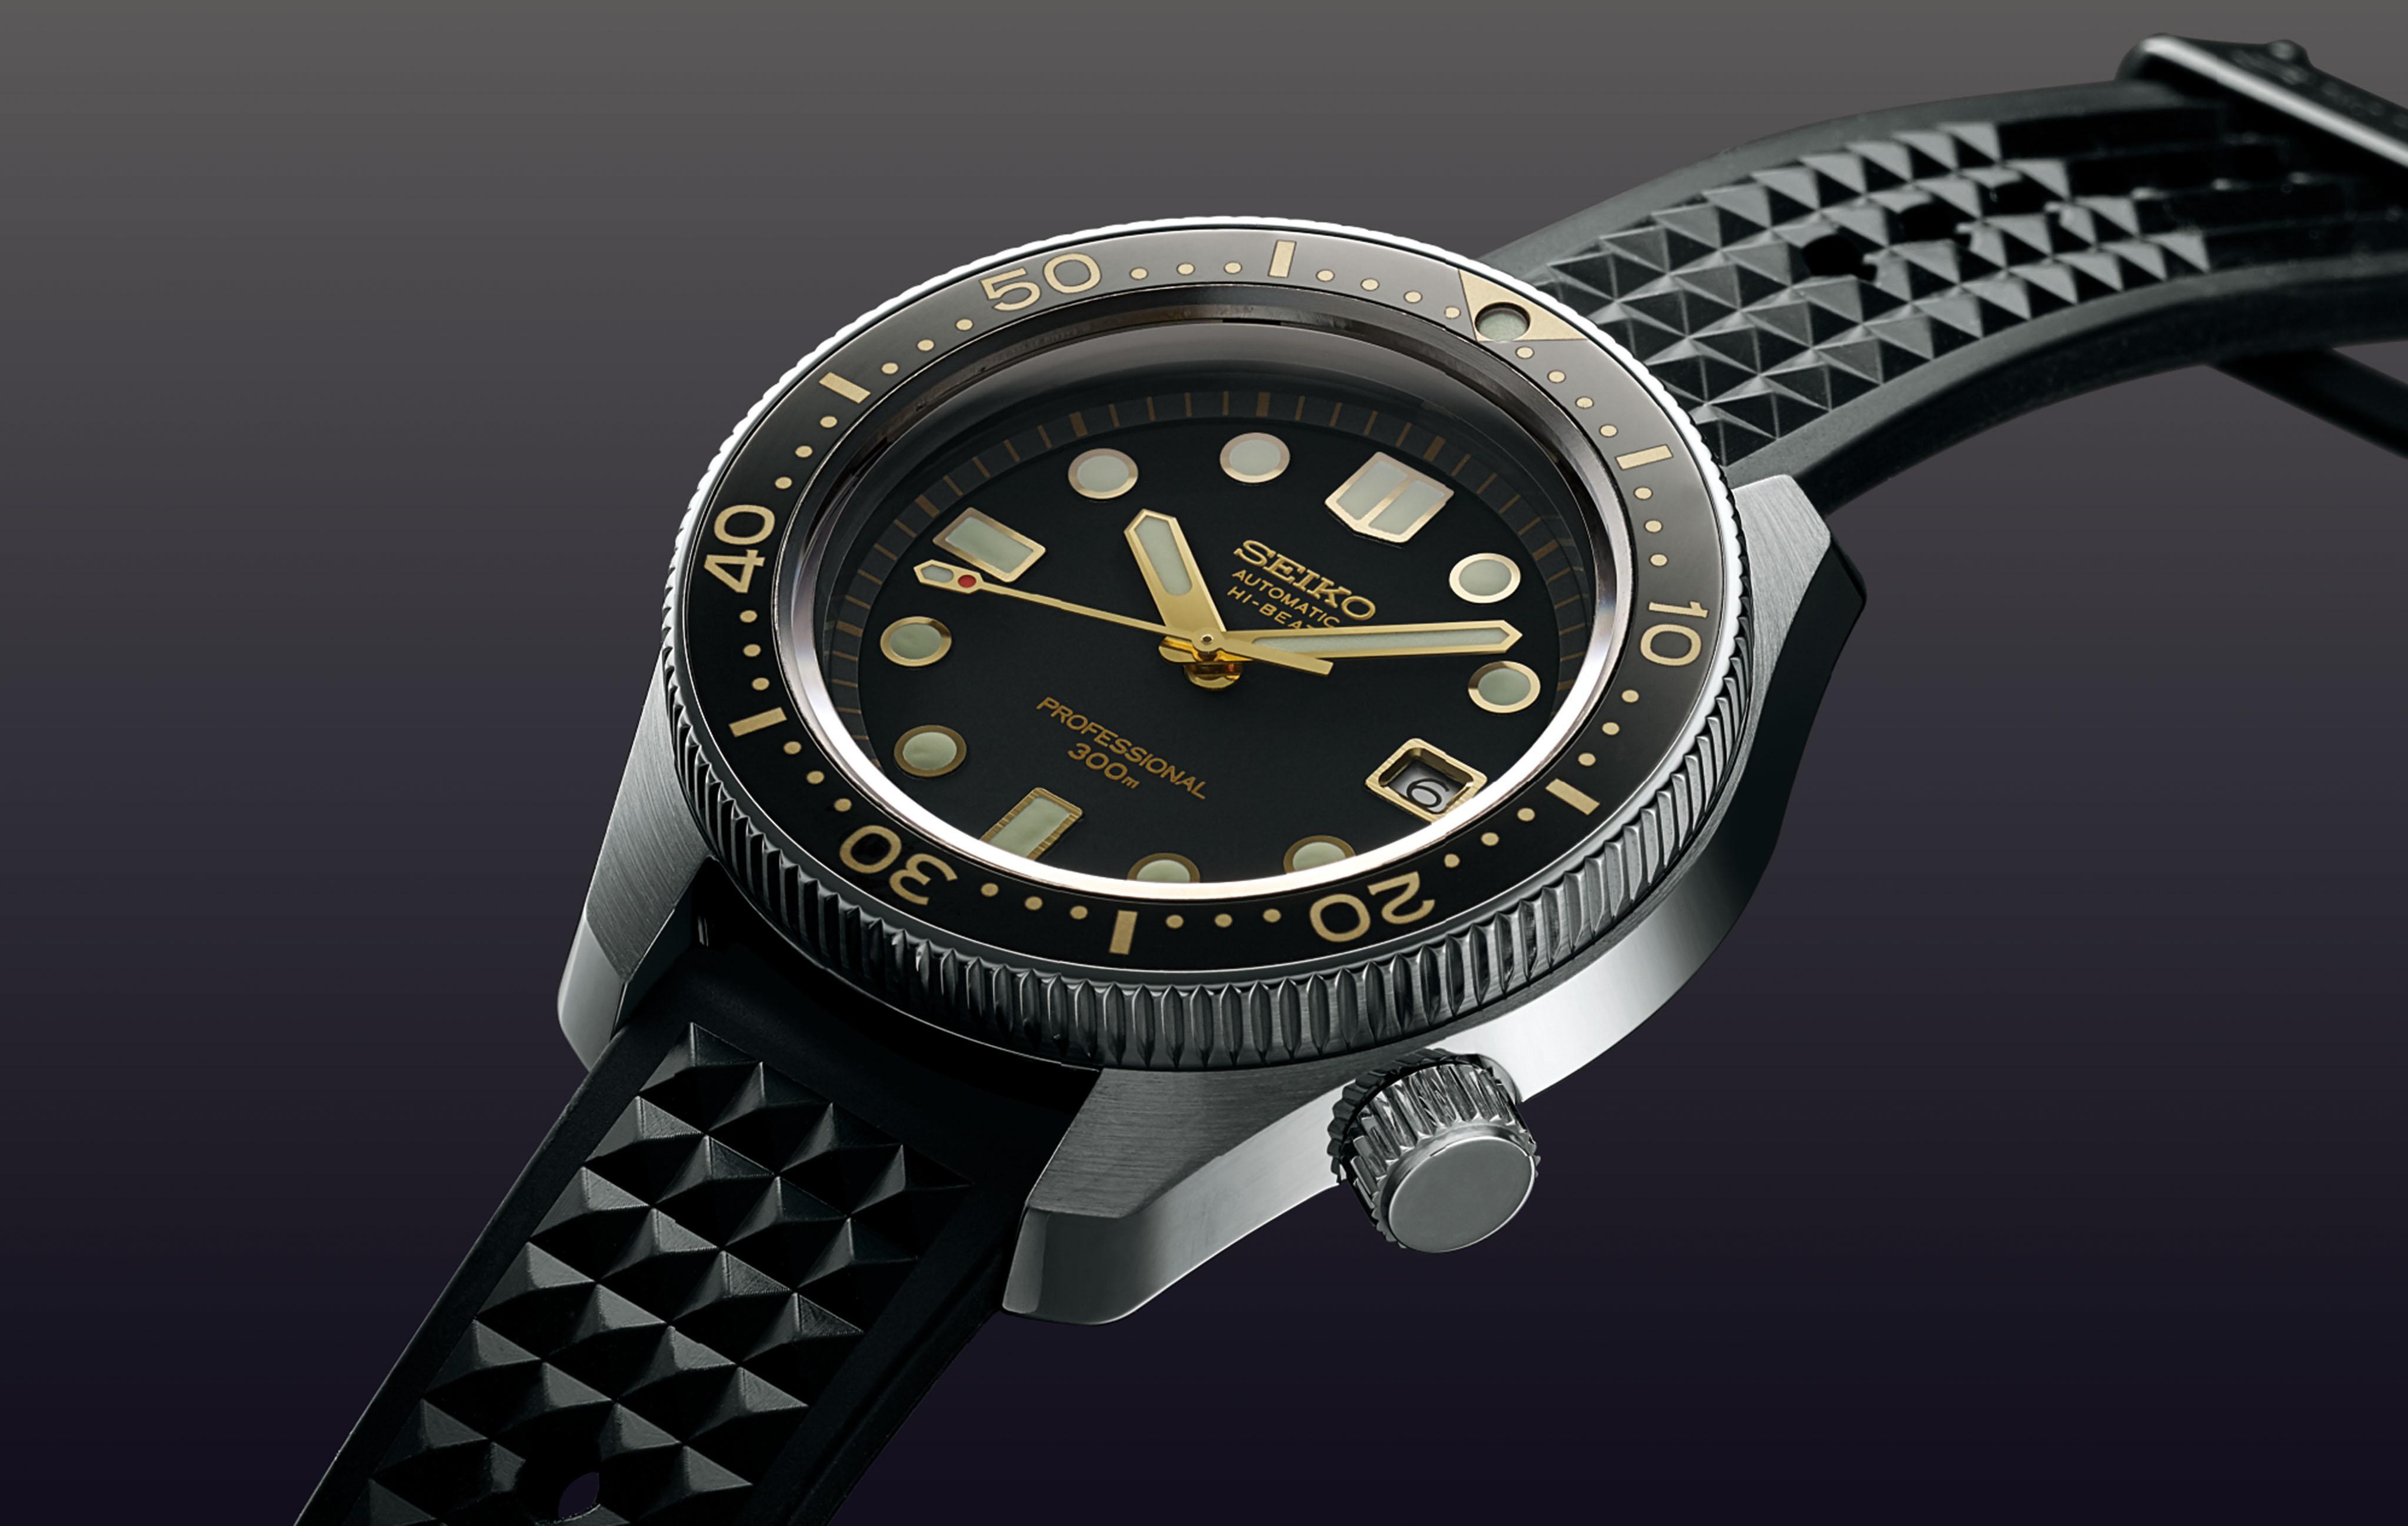 Seiko's expertise diver's is celebrated in the new Prospex collection | Seiko Watch